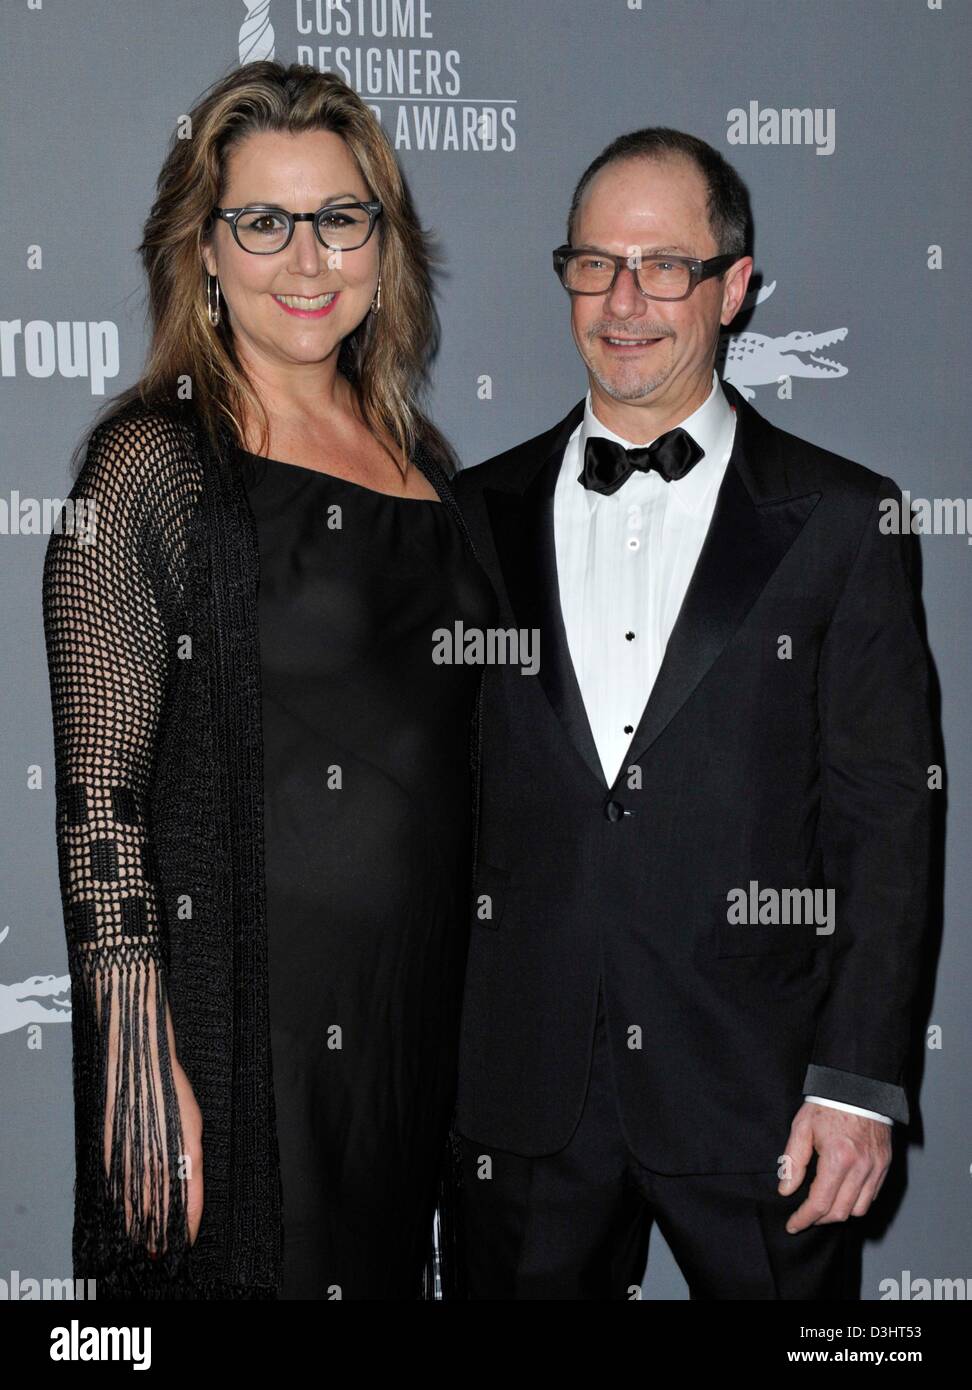 Beverly Hills, CA. USA. February 19, 2013. Lisa padovani, John Dunn at arrivals for The 15th Annual Costume Designers Guild Awards, The Beverly Hilton Hotel, Beverly Hills. Photo By: Dee Cercone/Everett Collection/Alamy Live News Stock Photo